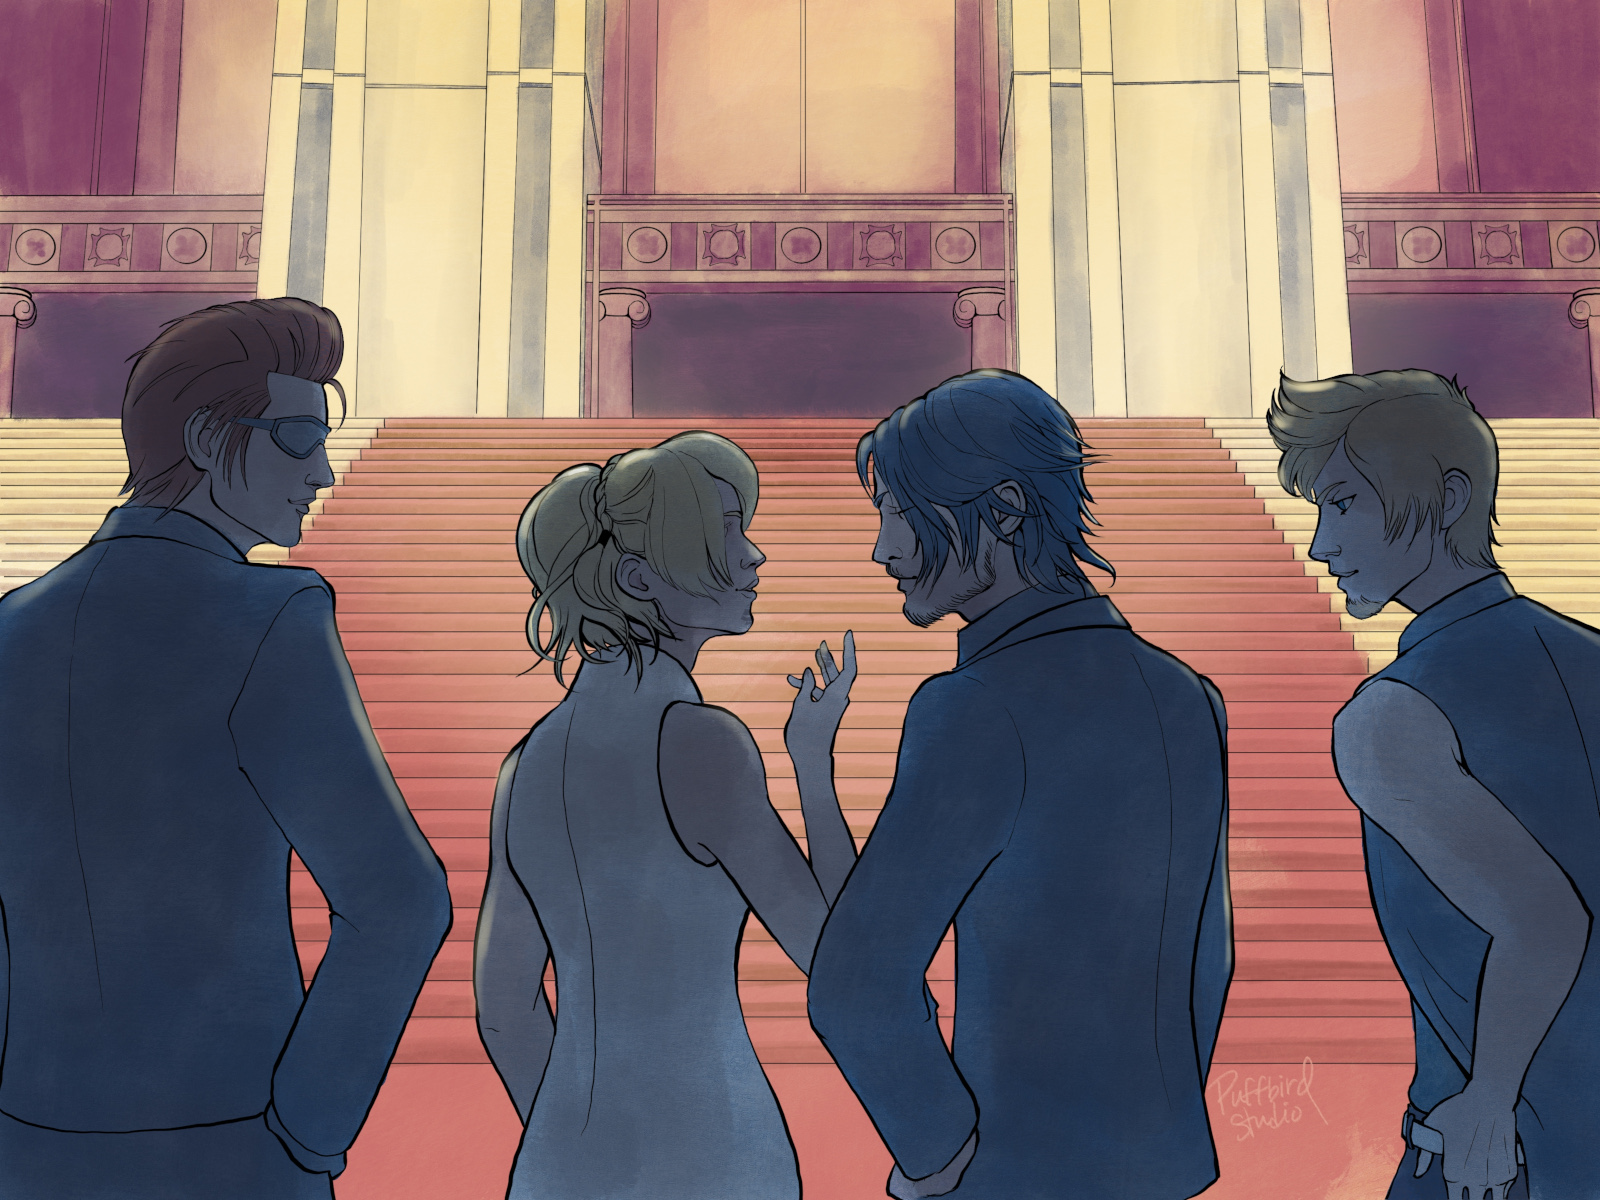 On the steps of the Citadel, Noctis and Luna talk together, with Ignis and Prompto observing.